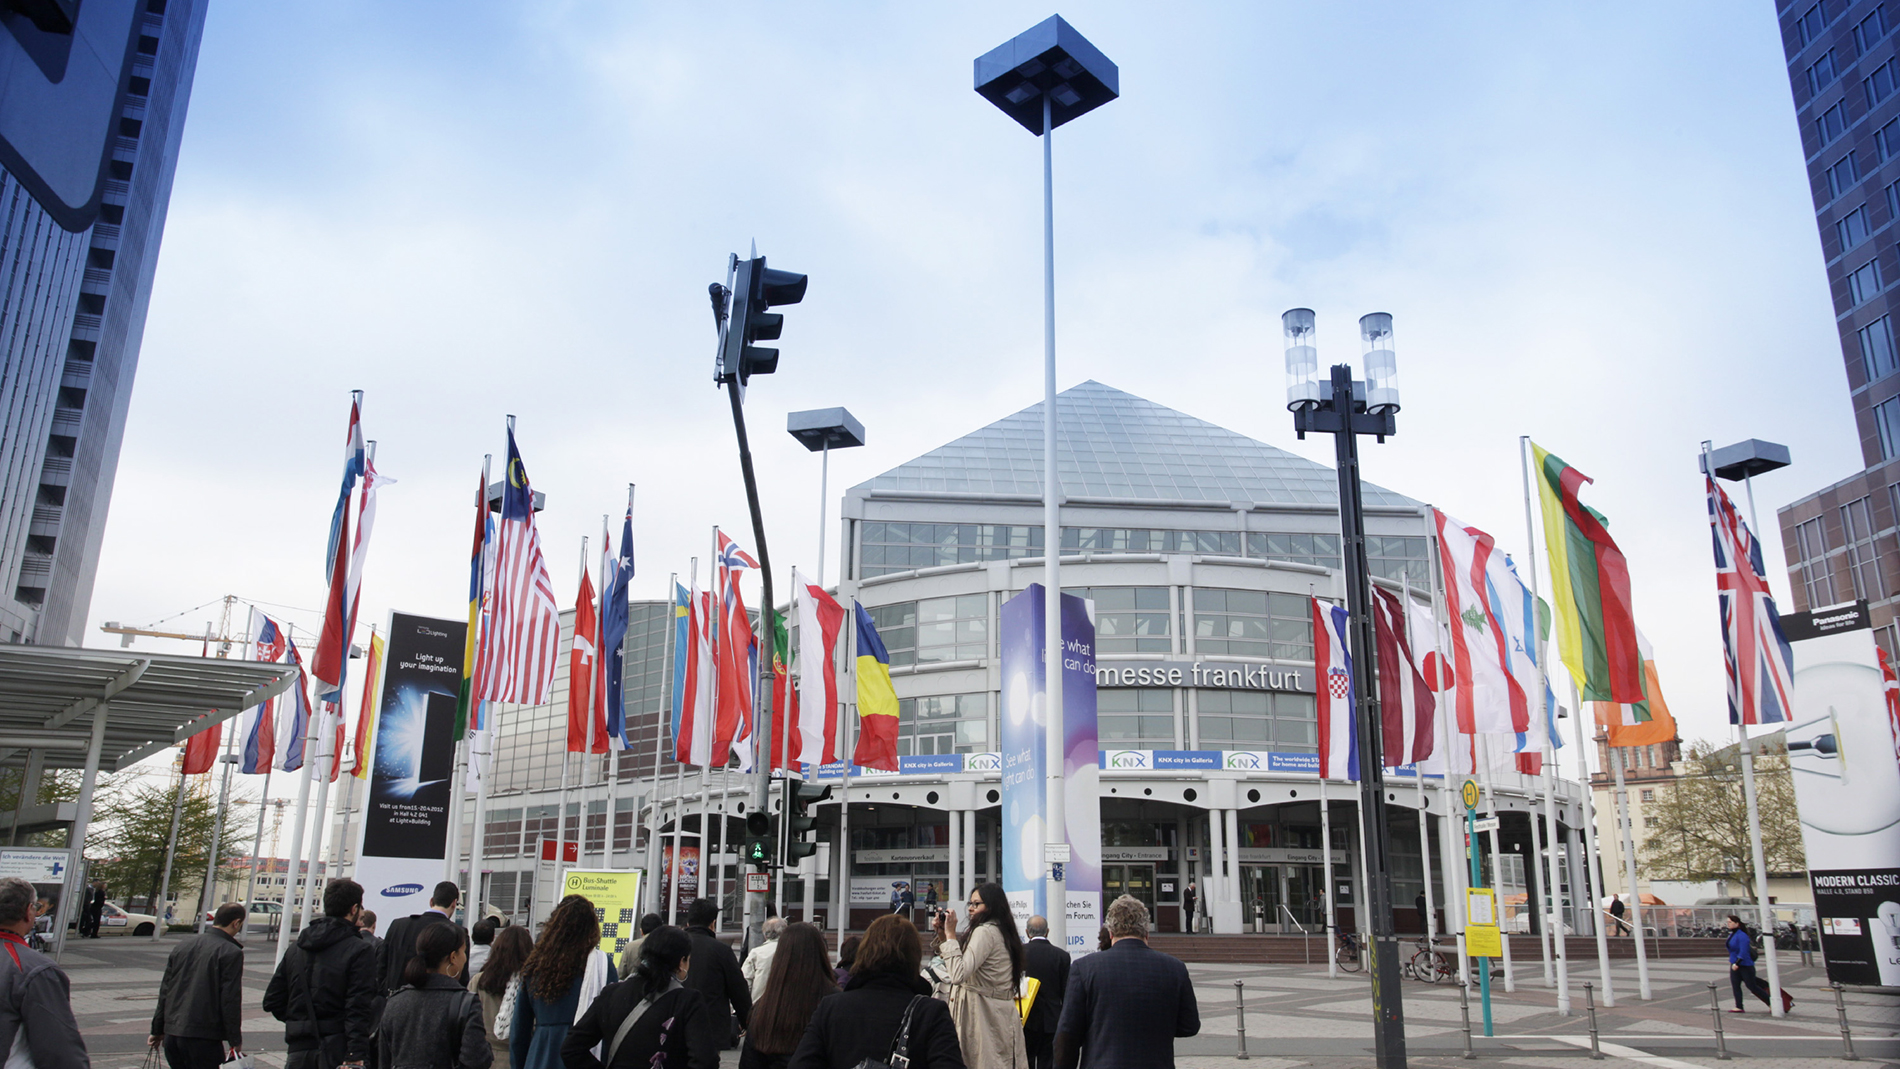 ISH 2019 will take place from 11 – 15 March with France as its Partner Country.  Image: Messe Frankfurt.